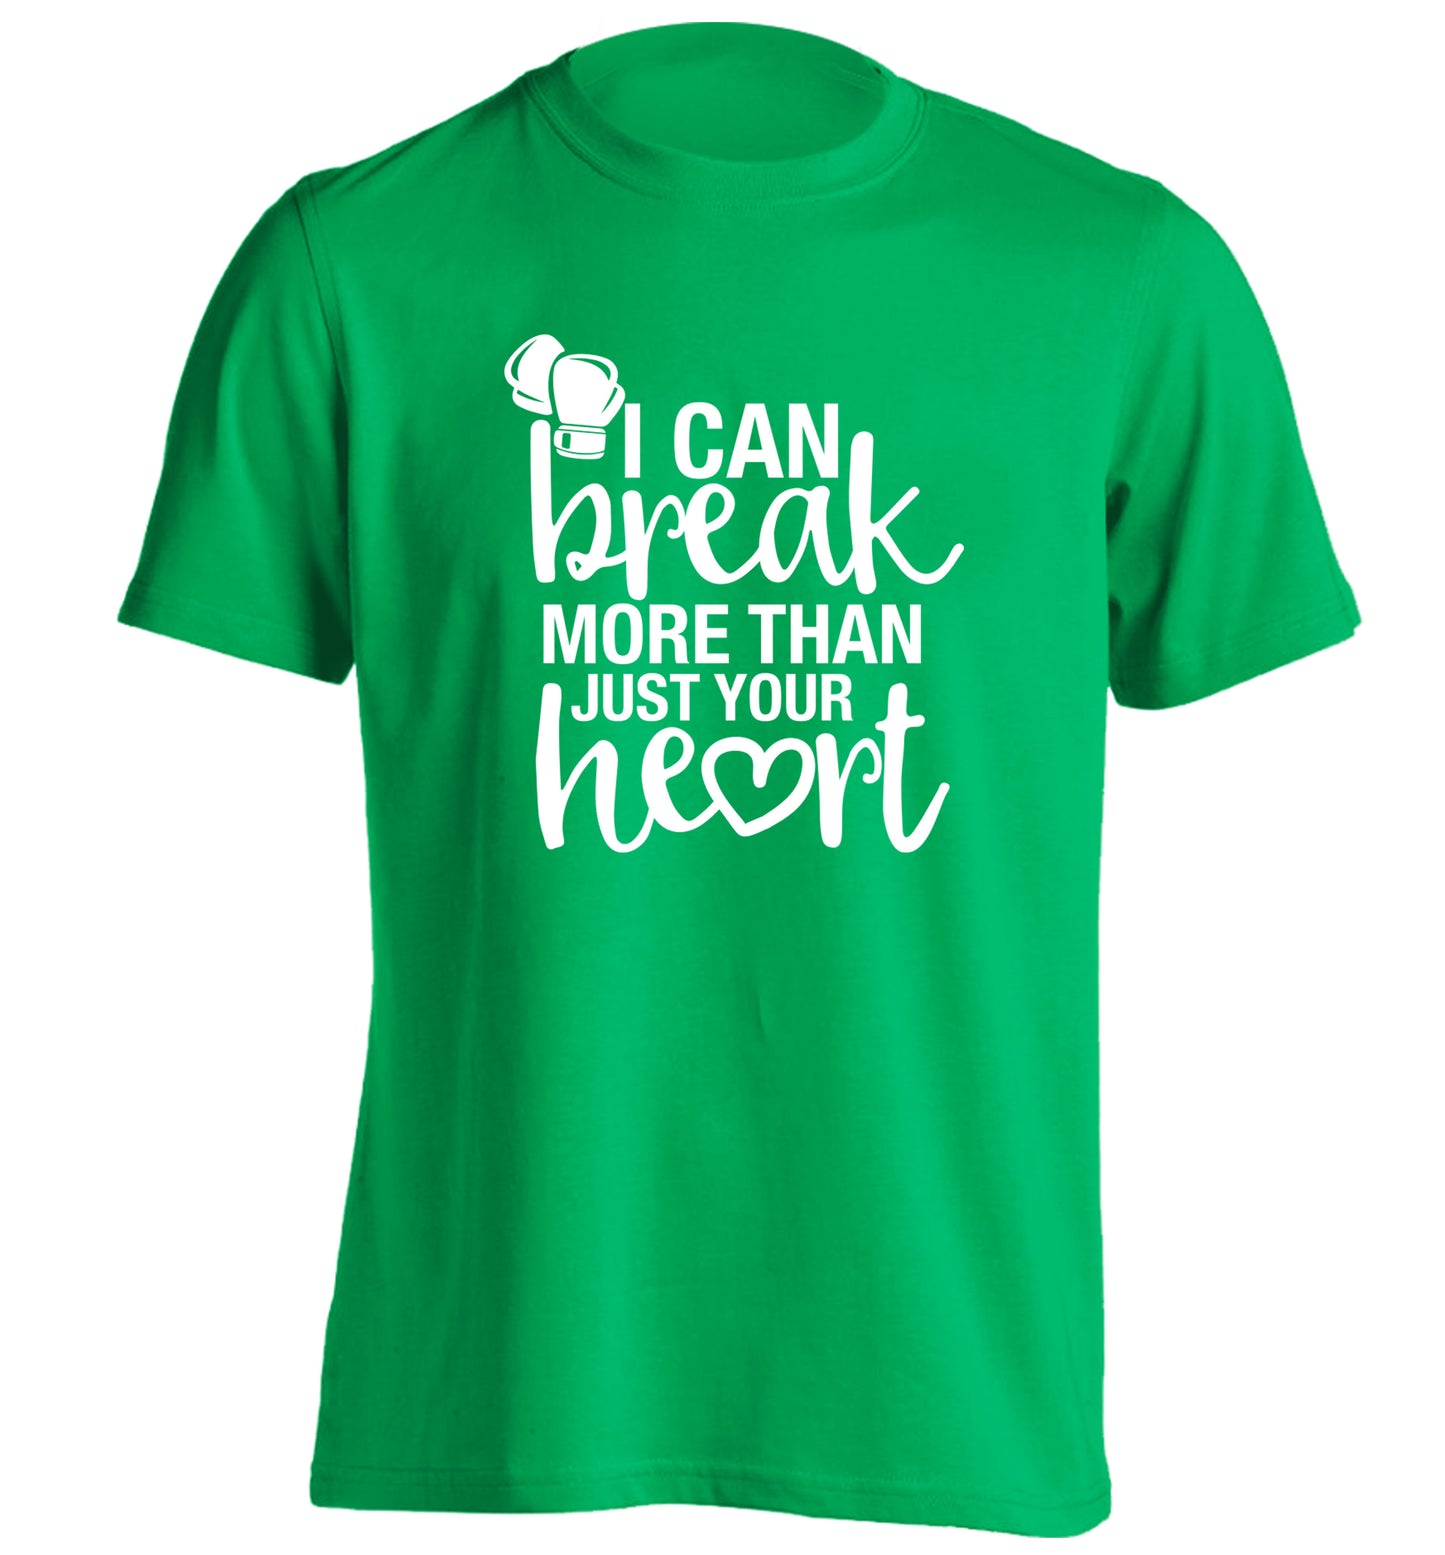 I can break more than just your heart adults unisex green Tshirt 2XL